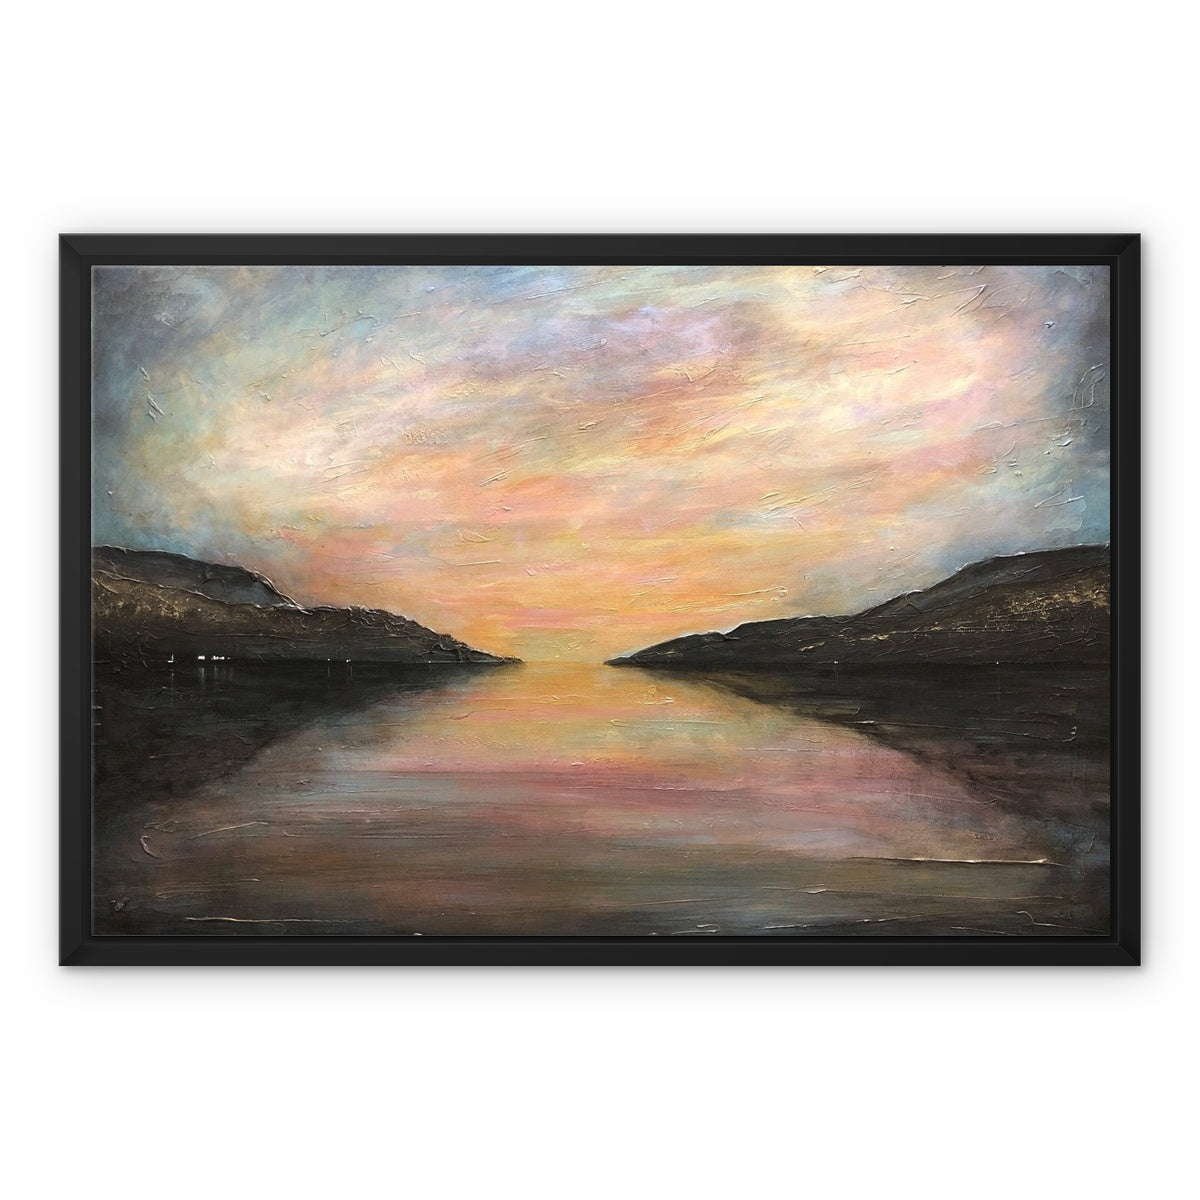 Loch Ness Glow Painting | Framed Canvas-Floating Framed Canvas Prints-Scottish Lochs & Mountains Art Gallery-24"x18"-Black Frame-Paintings, Prints, Homeware, Art Gifts From Scotland By Scottish Artist Kevin Hunter